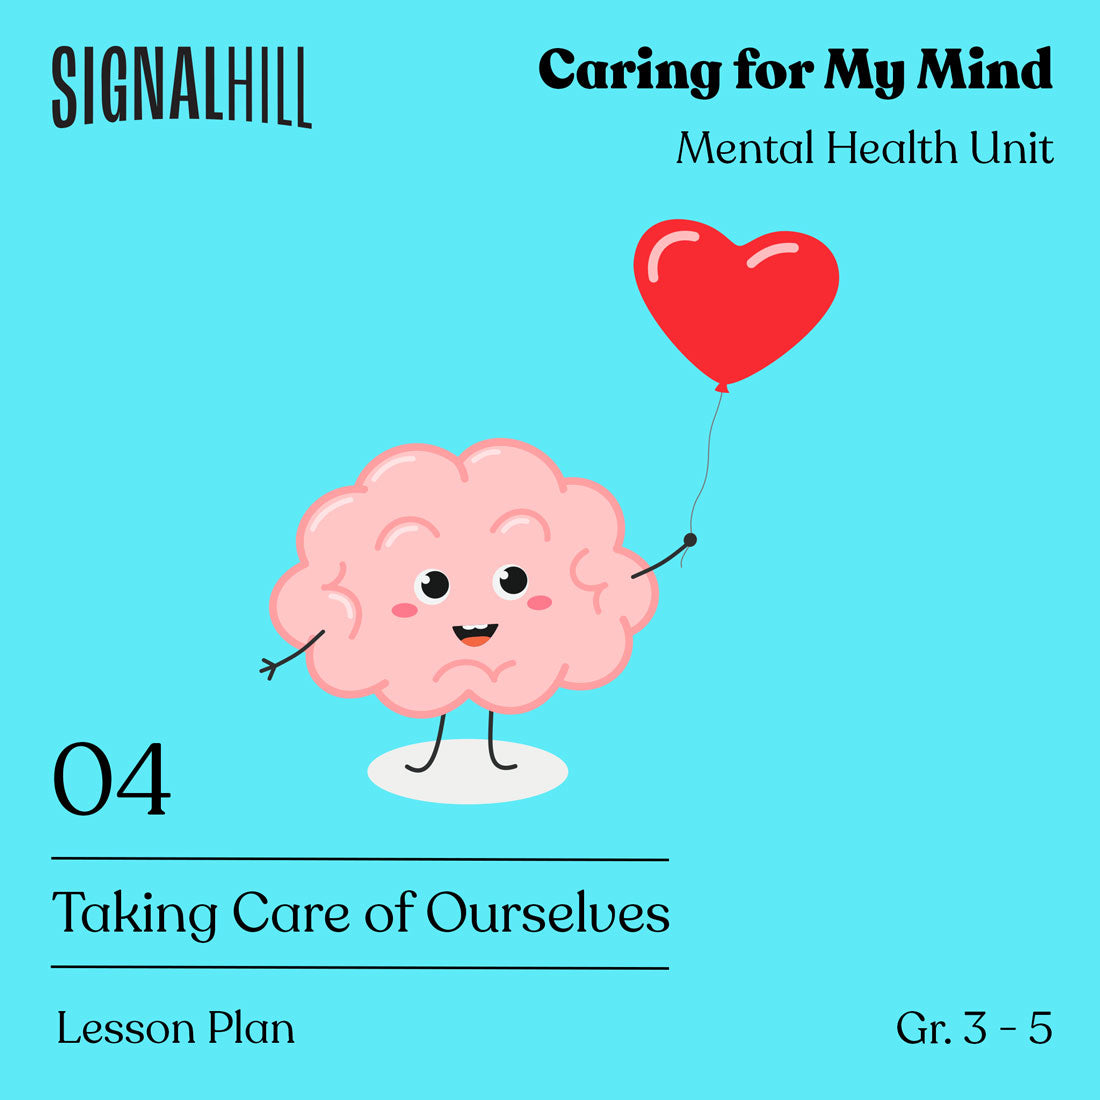 Lesson Plan 4: Taking Care of Ourselves